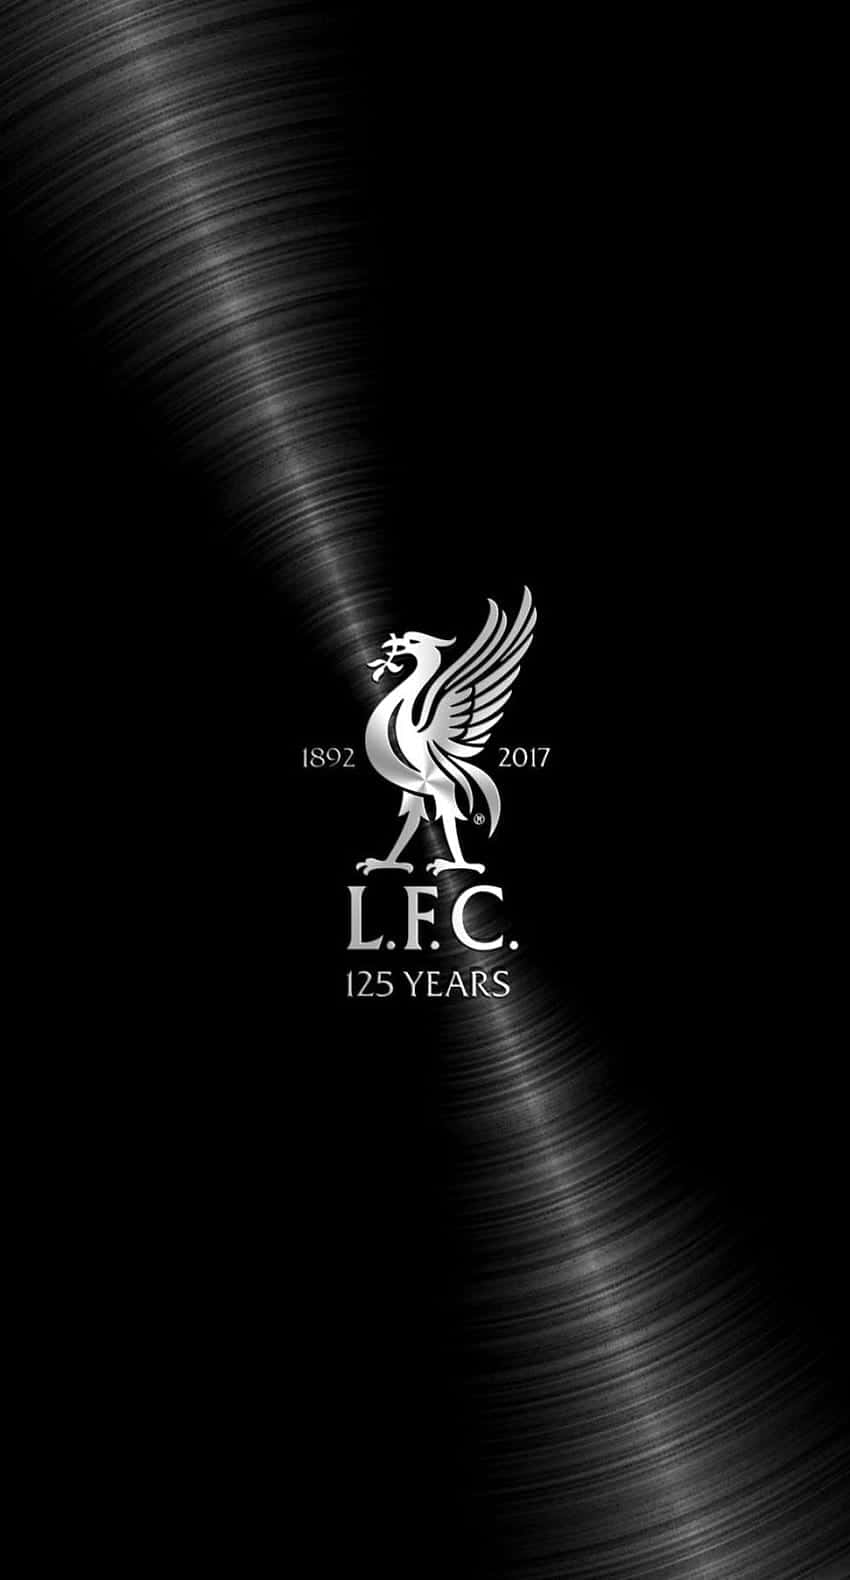 Liverpool Fc Logo On A Black Background Wallpaper